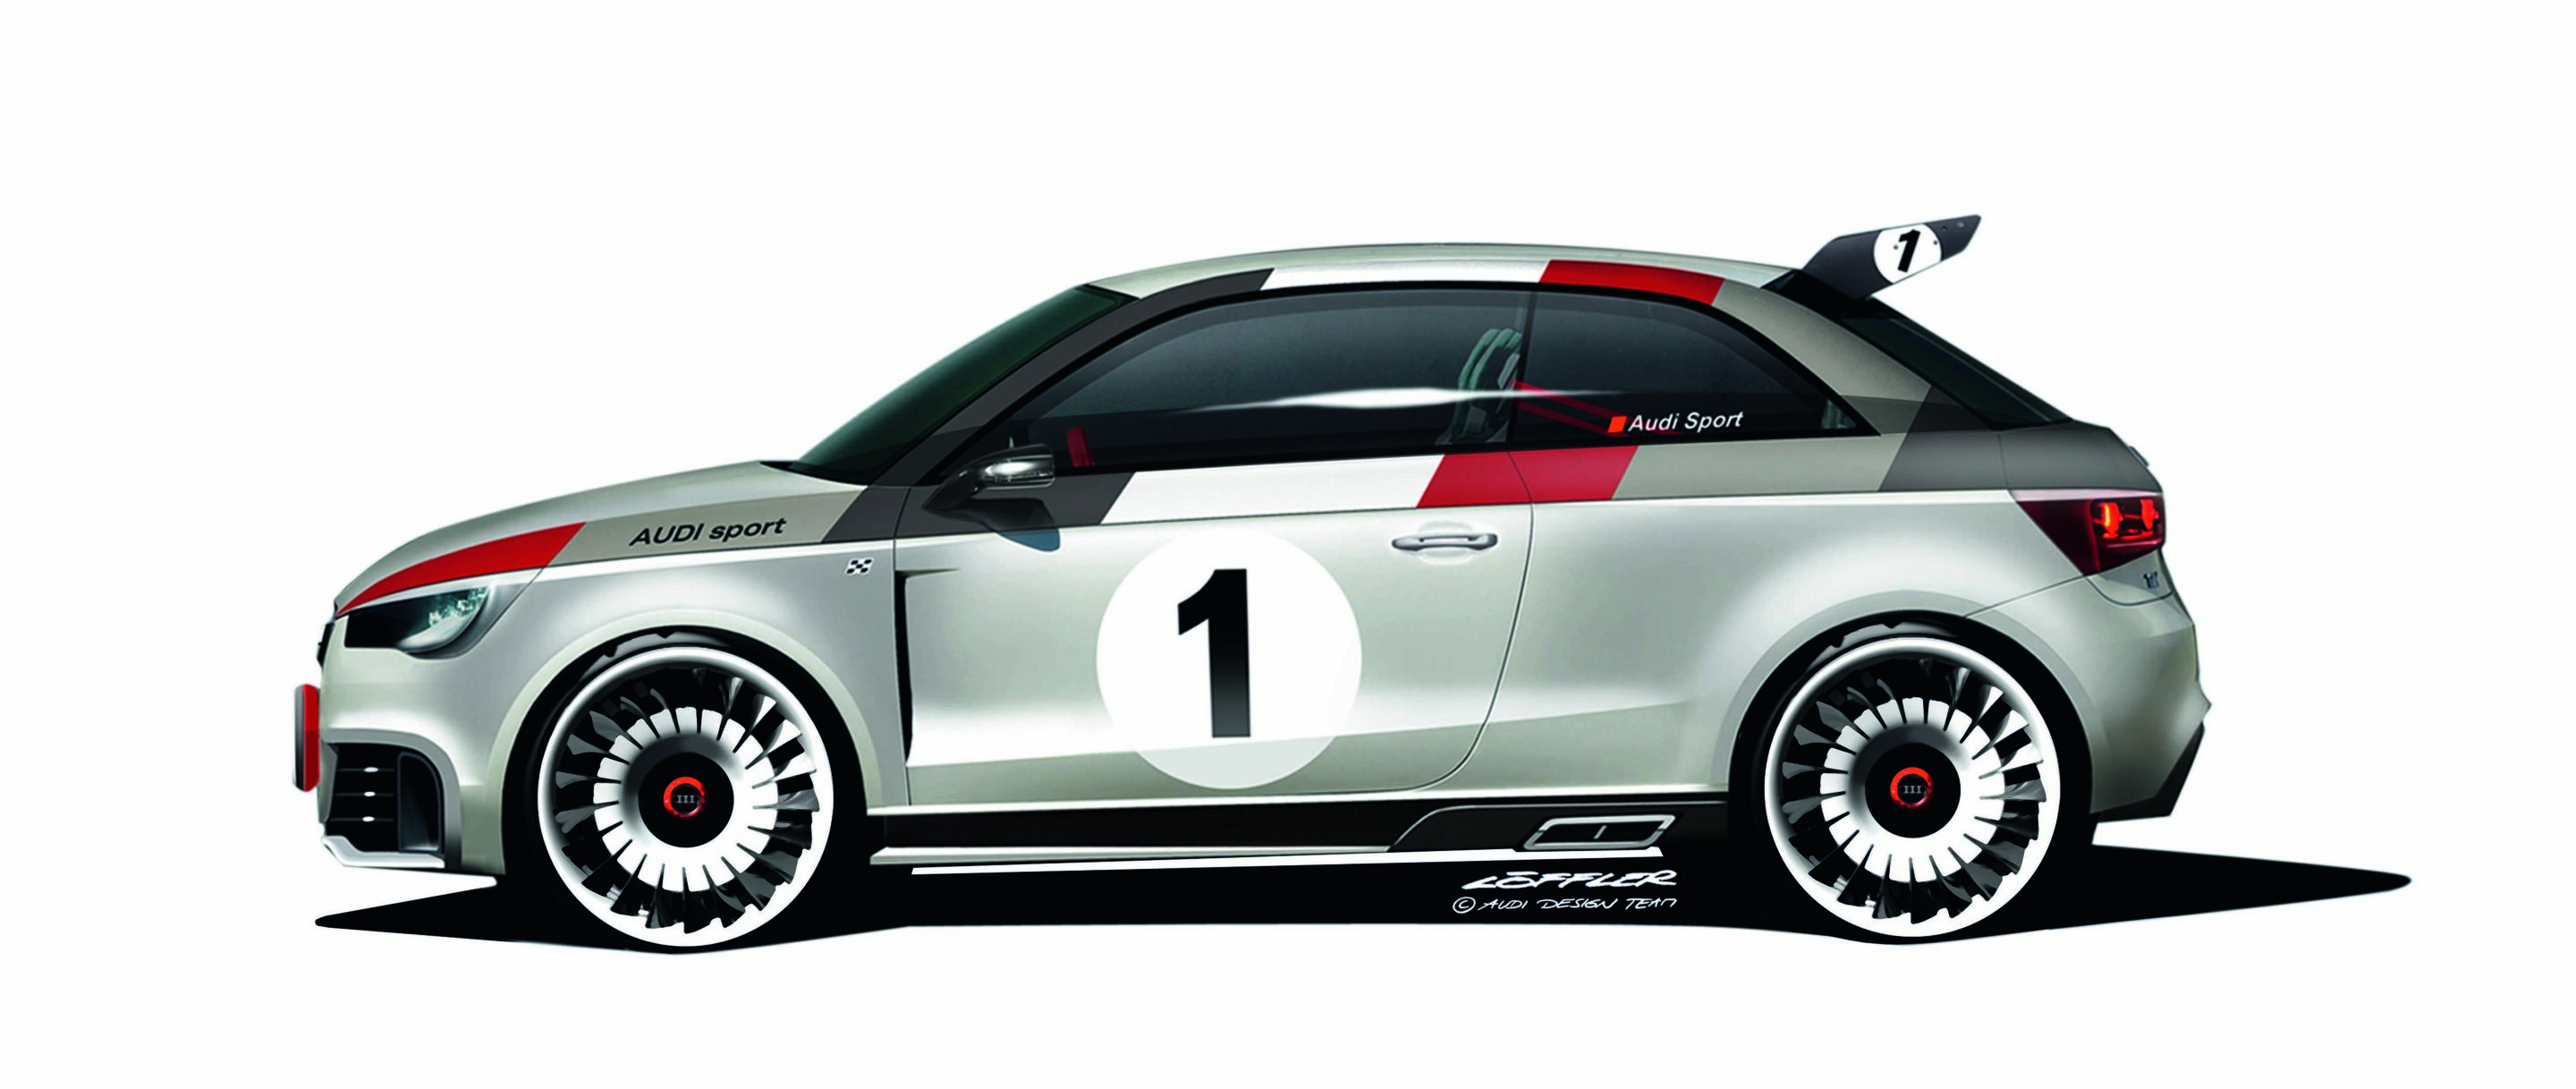 Feature Flick: Making of the Audi A1 Clubsport